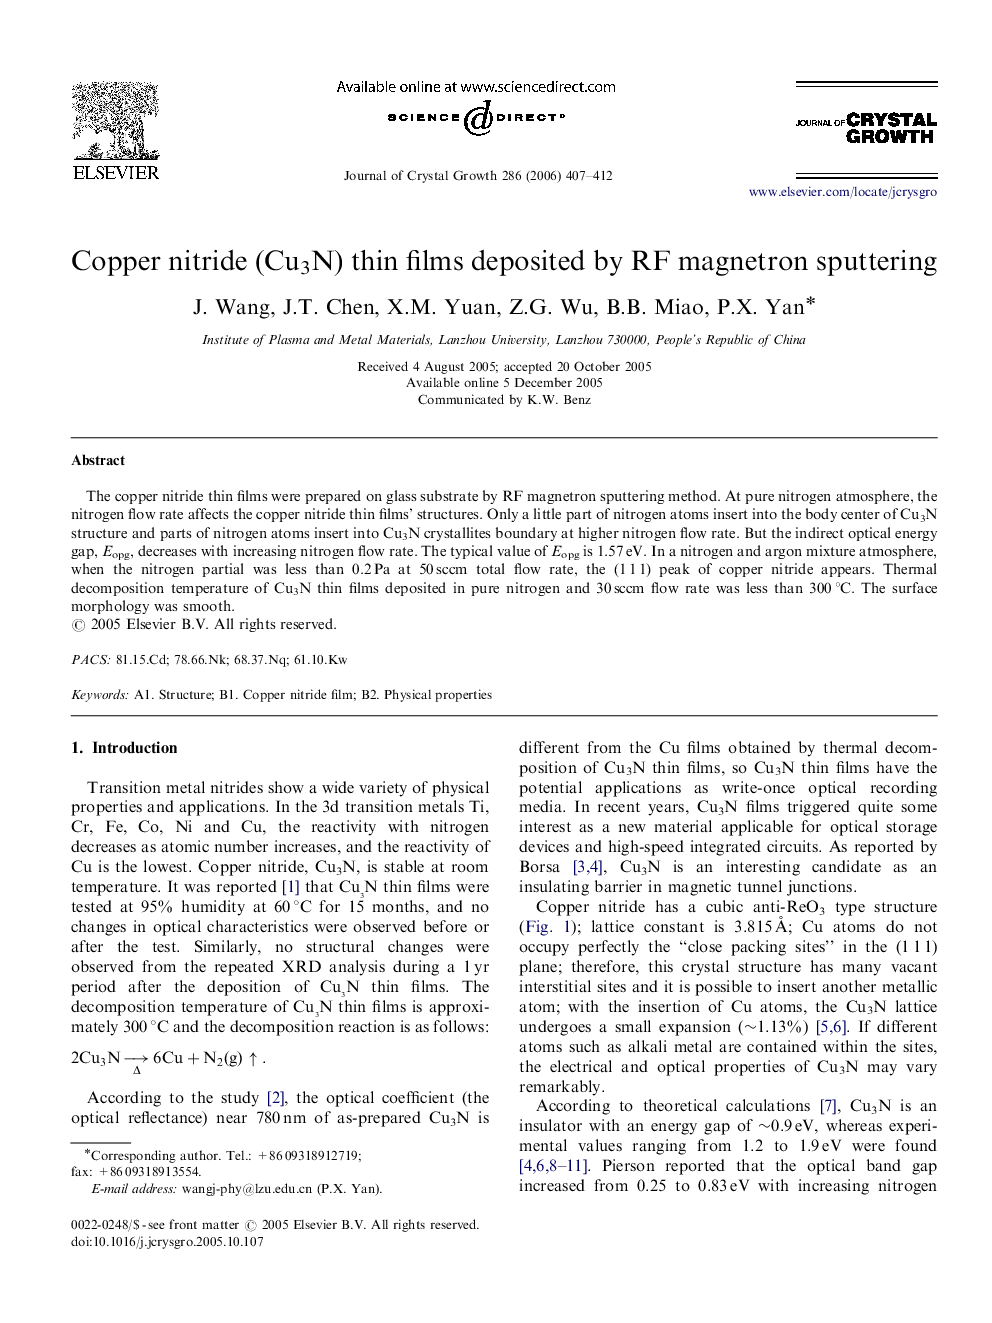 Copper nitride (Cu3N) thin films deposited by RF magnetron sputtering